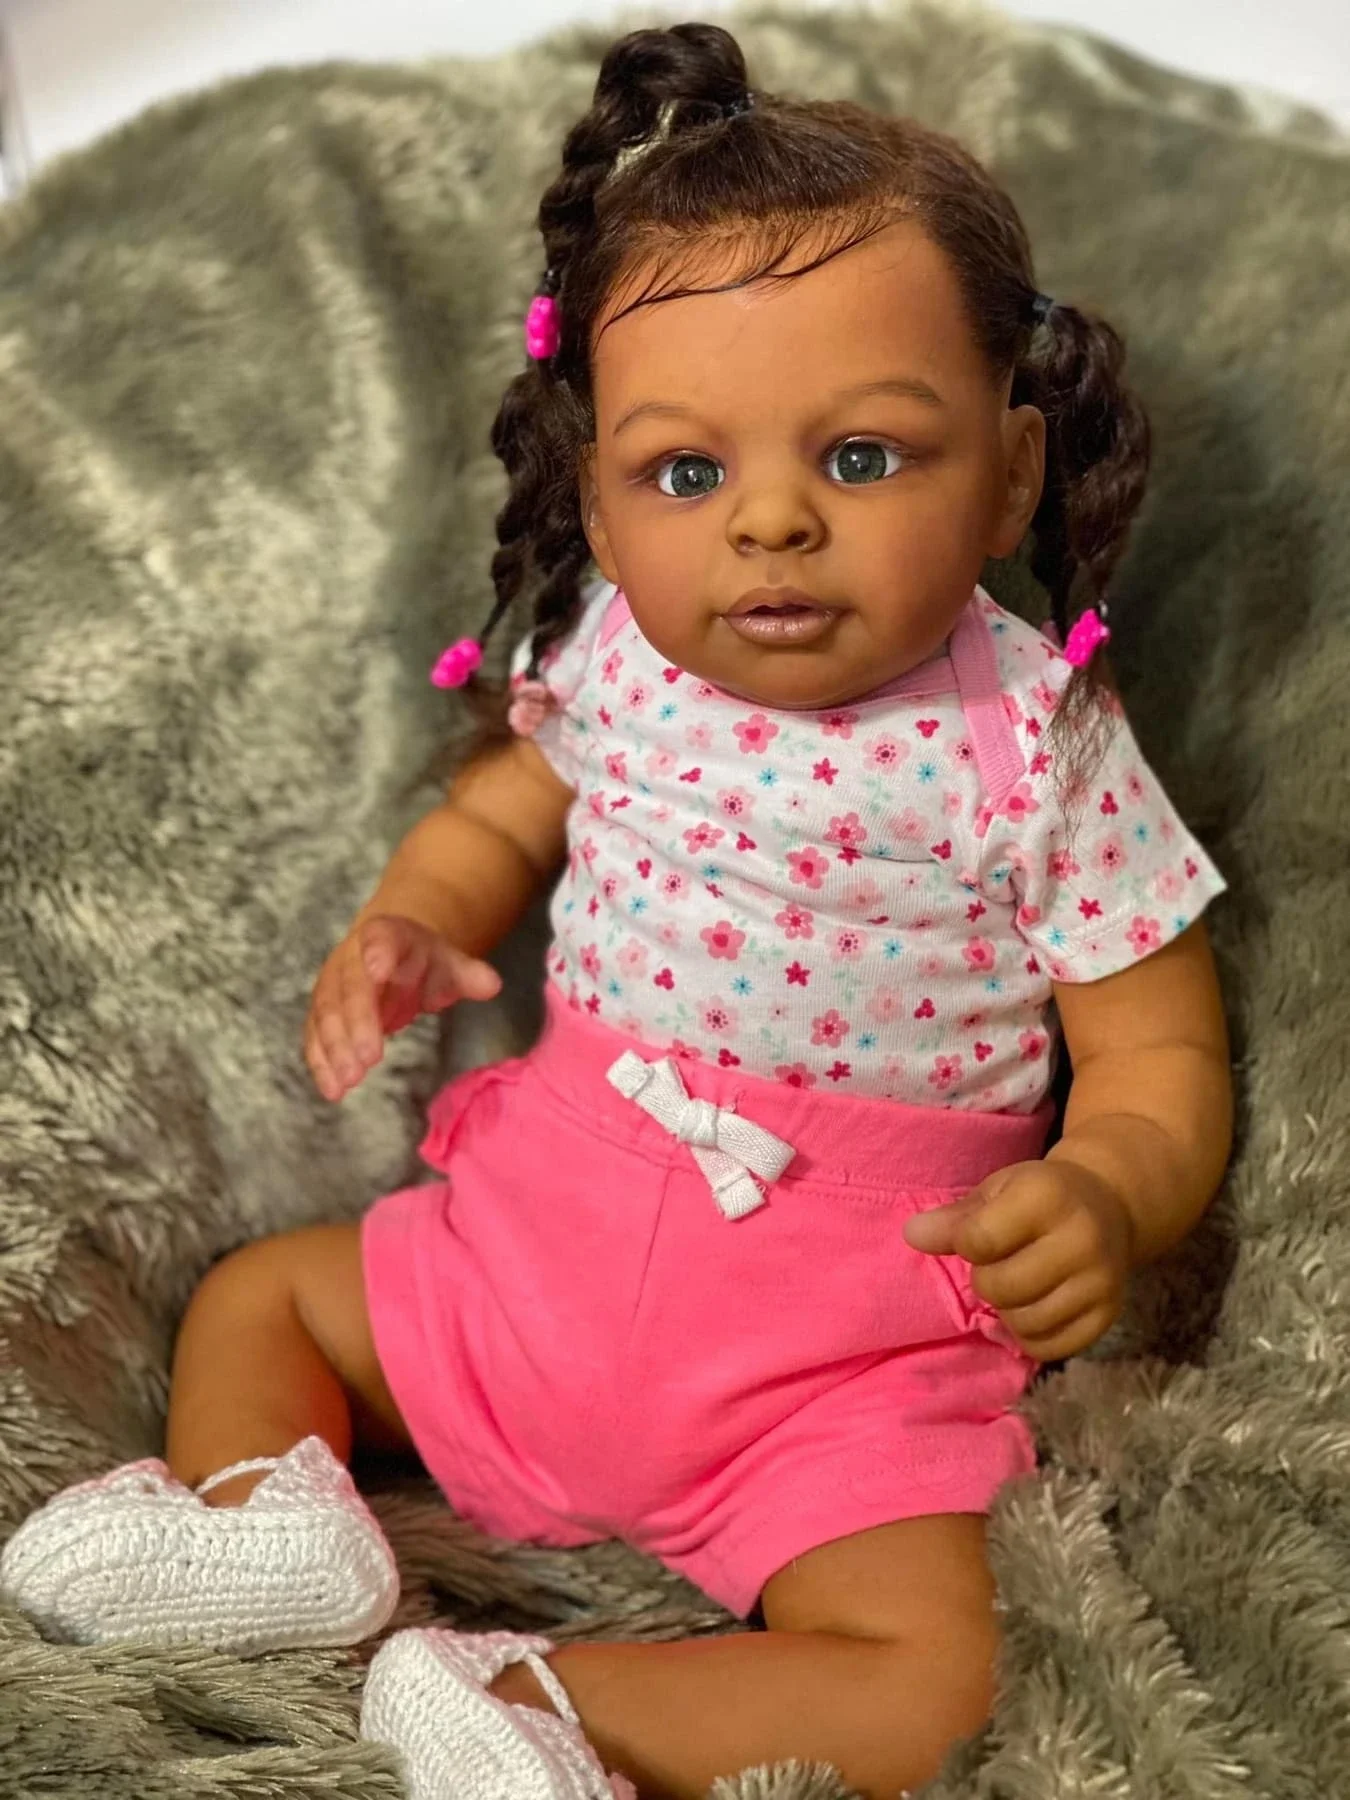 

60cm Jaylan in Dark Brown Skin Color Soft Body Reborn Toddler African American Cuddly Baby Girl Doll Hand-rooted hair